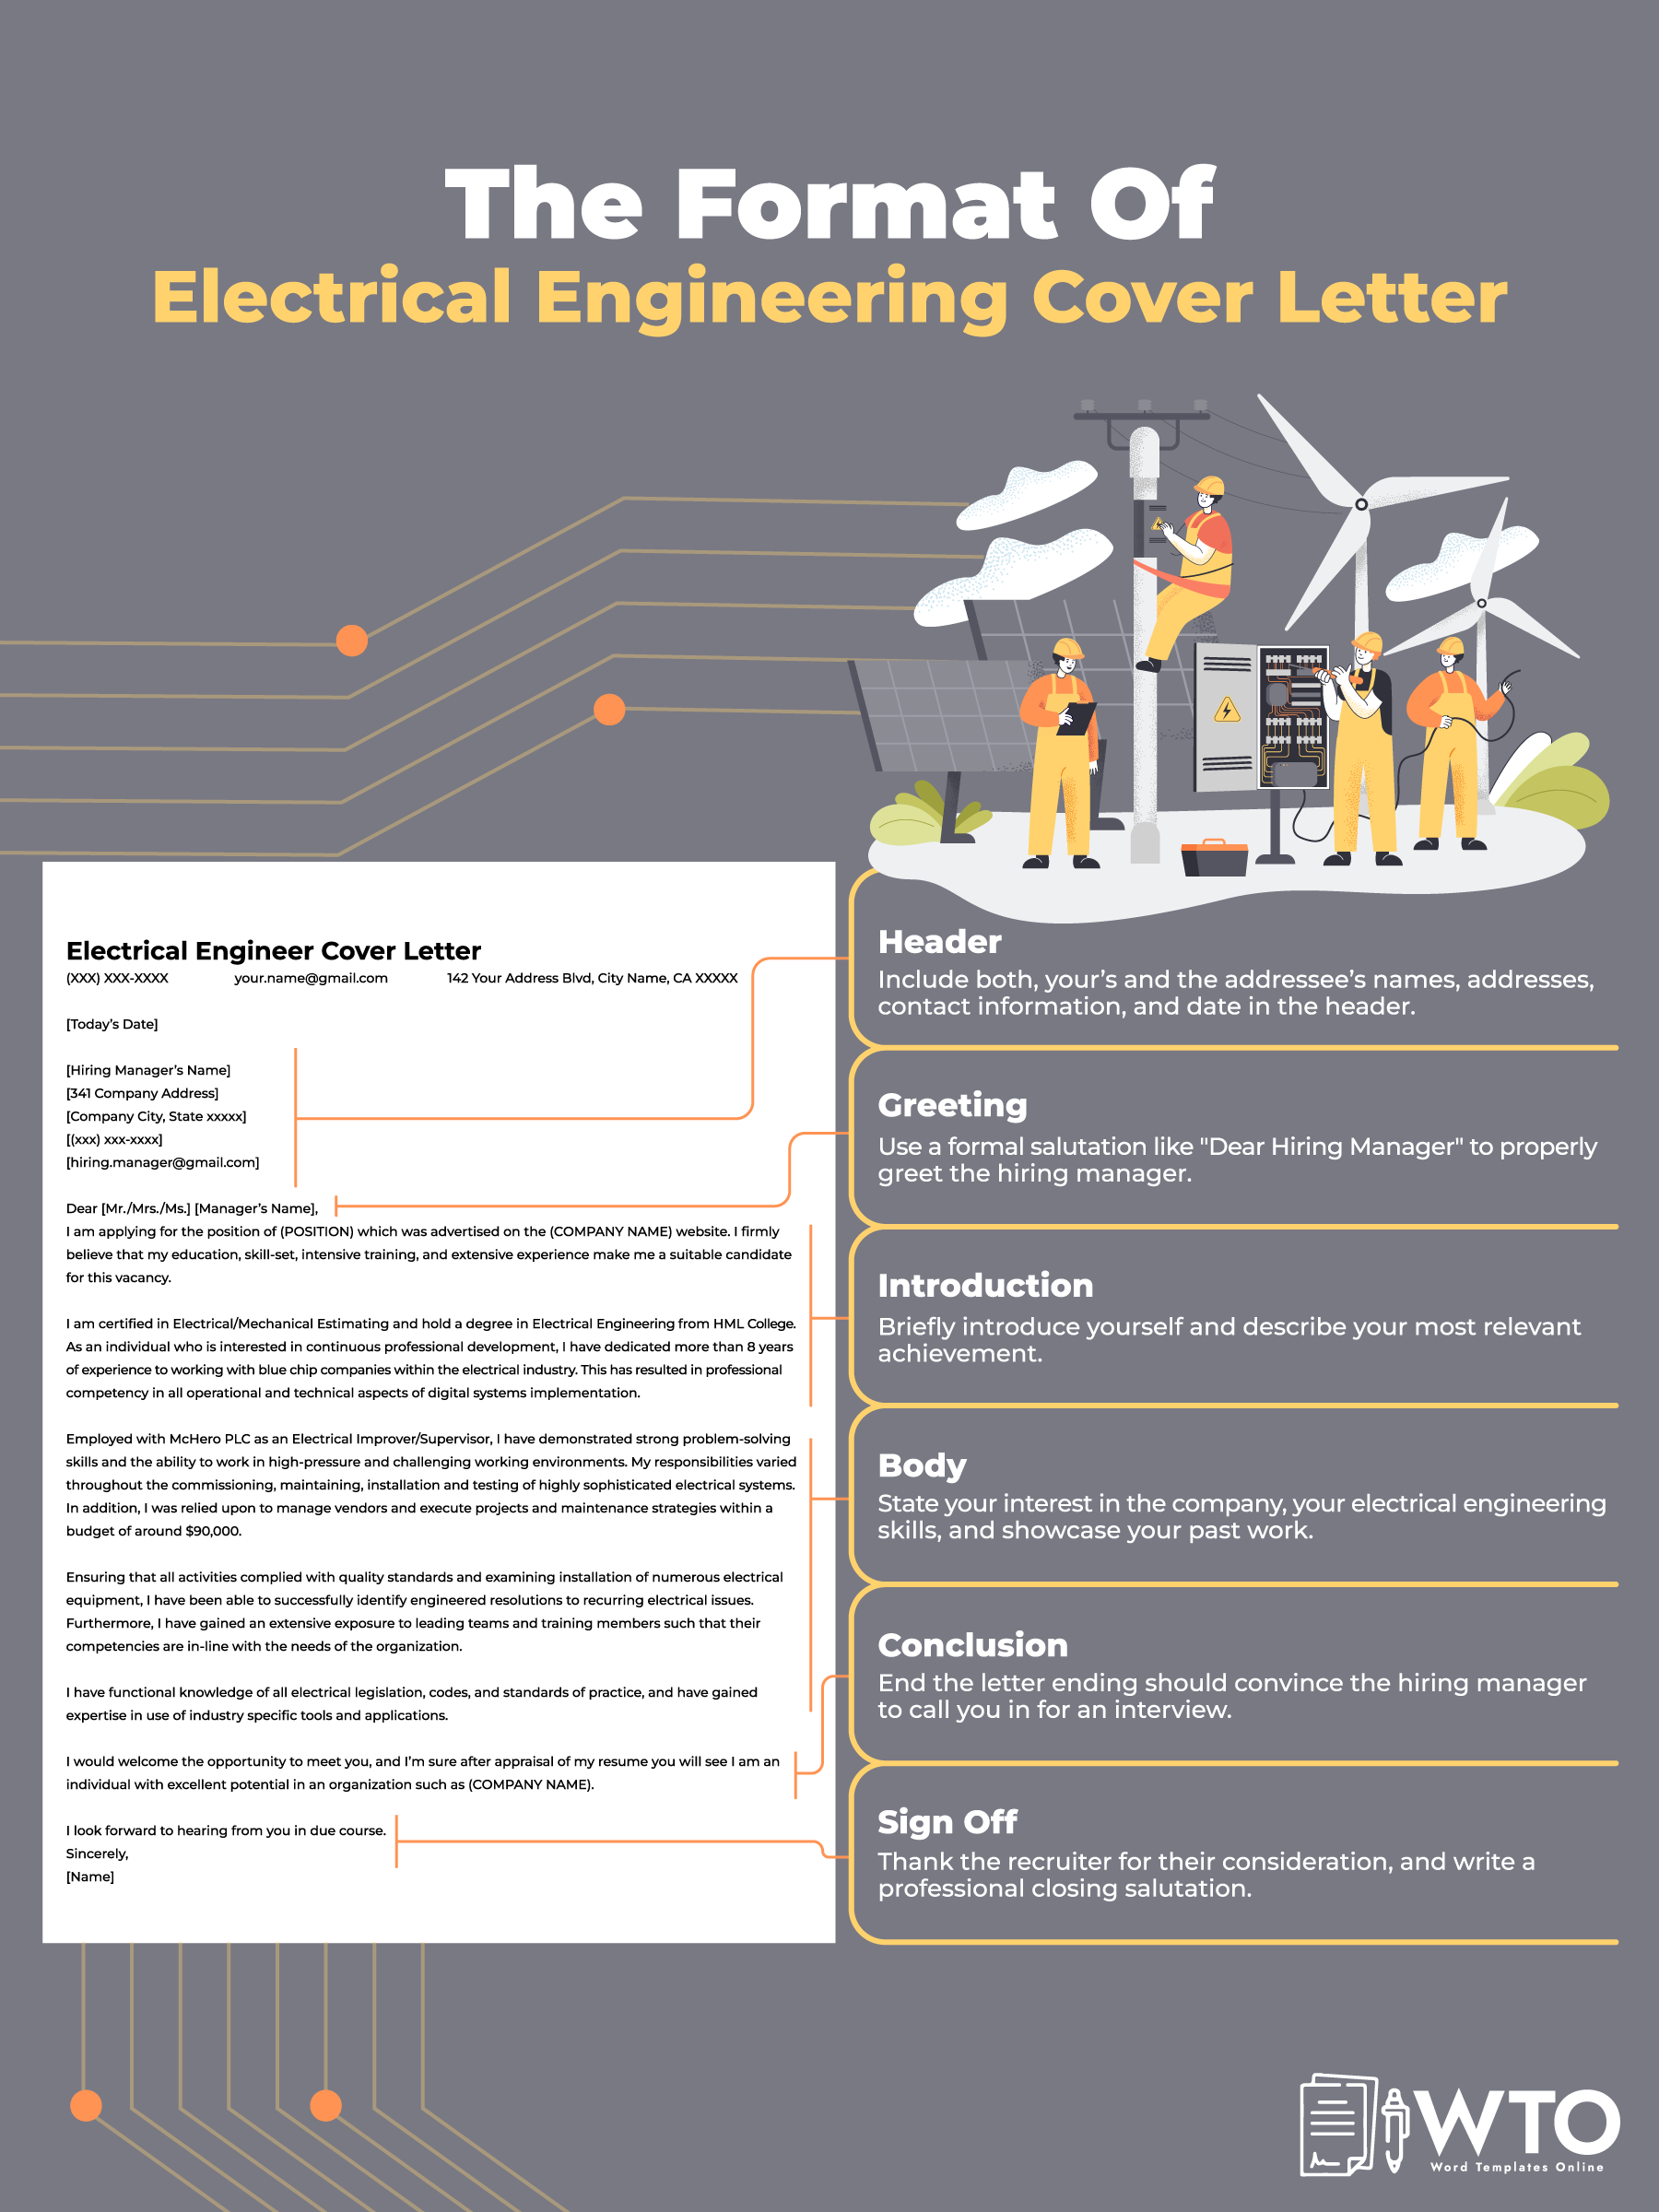 This infographic tells about the format of an electrical engineering cover letter.